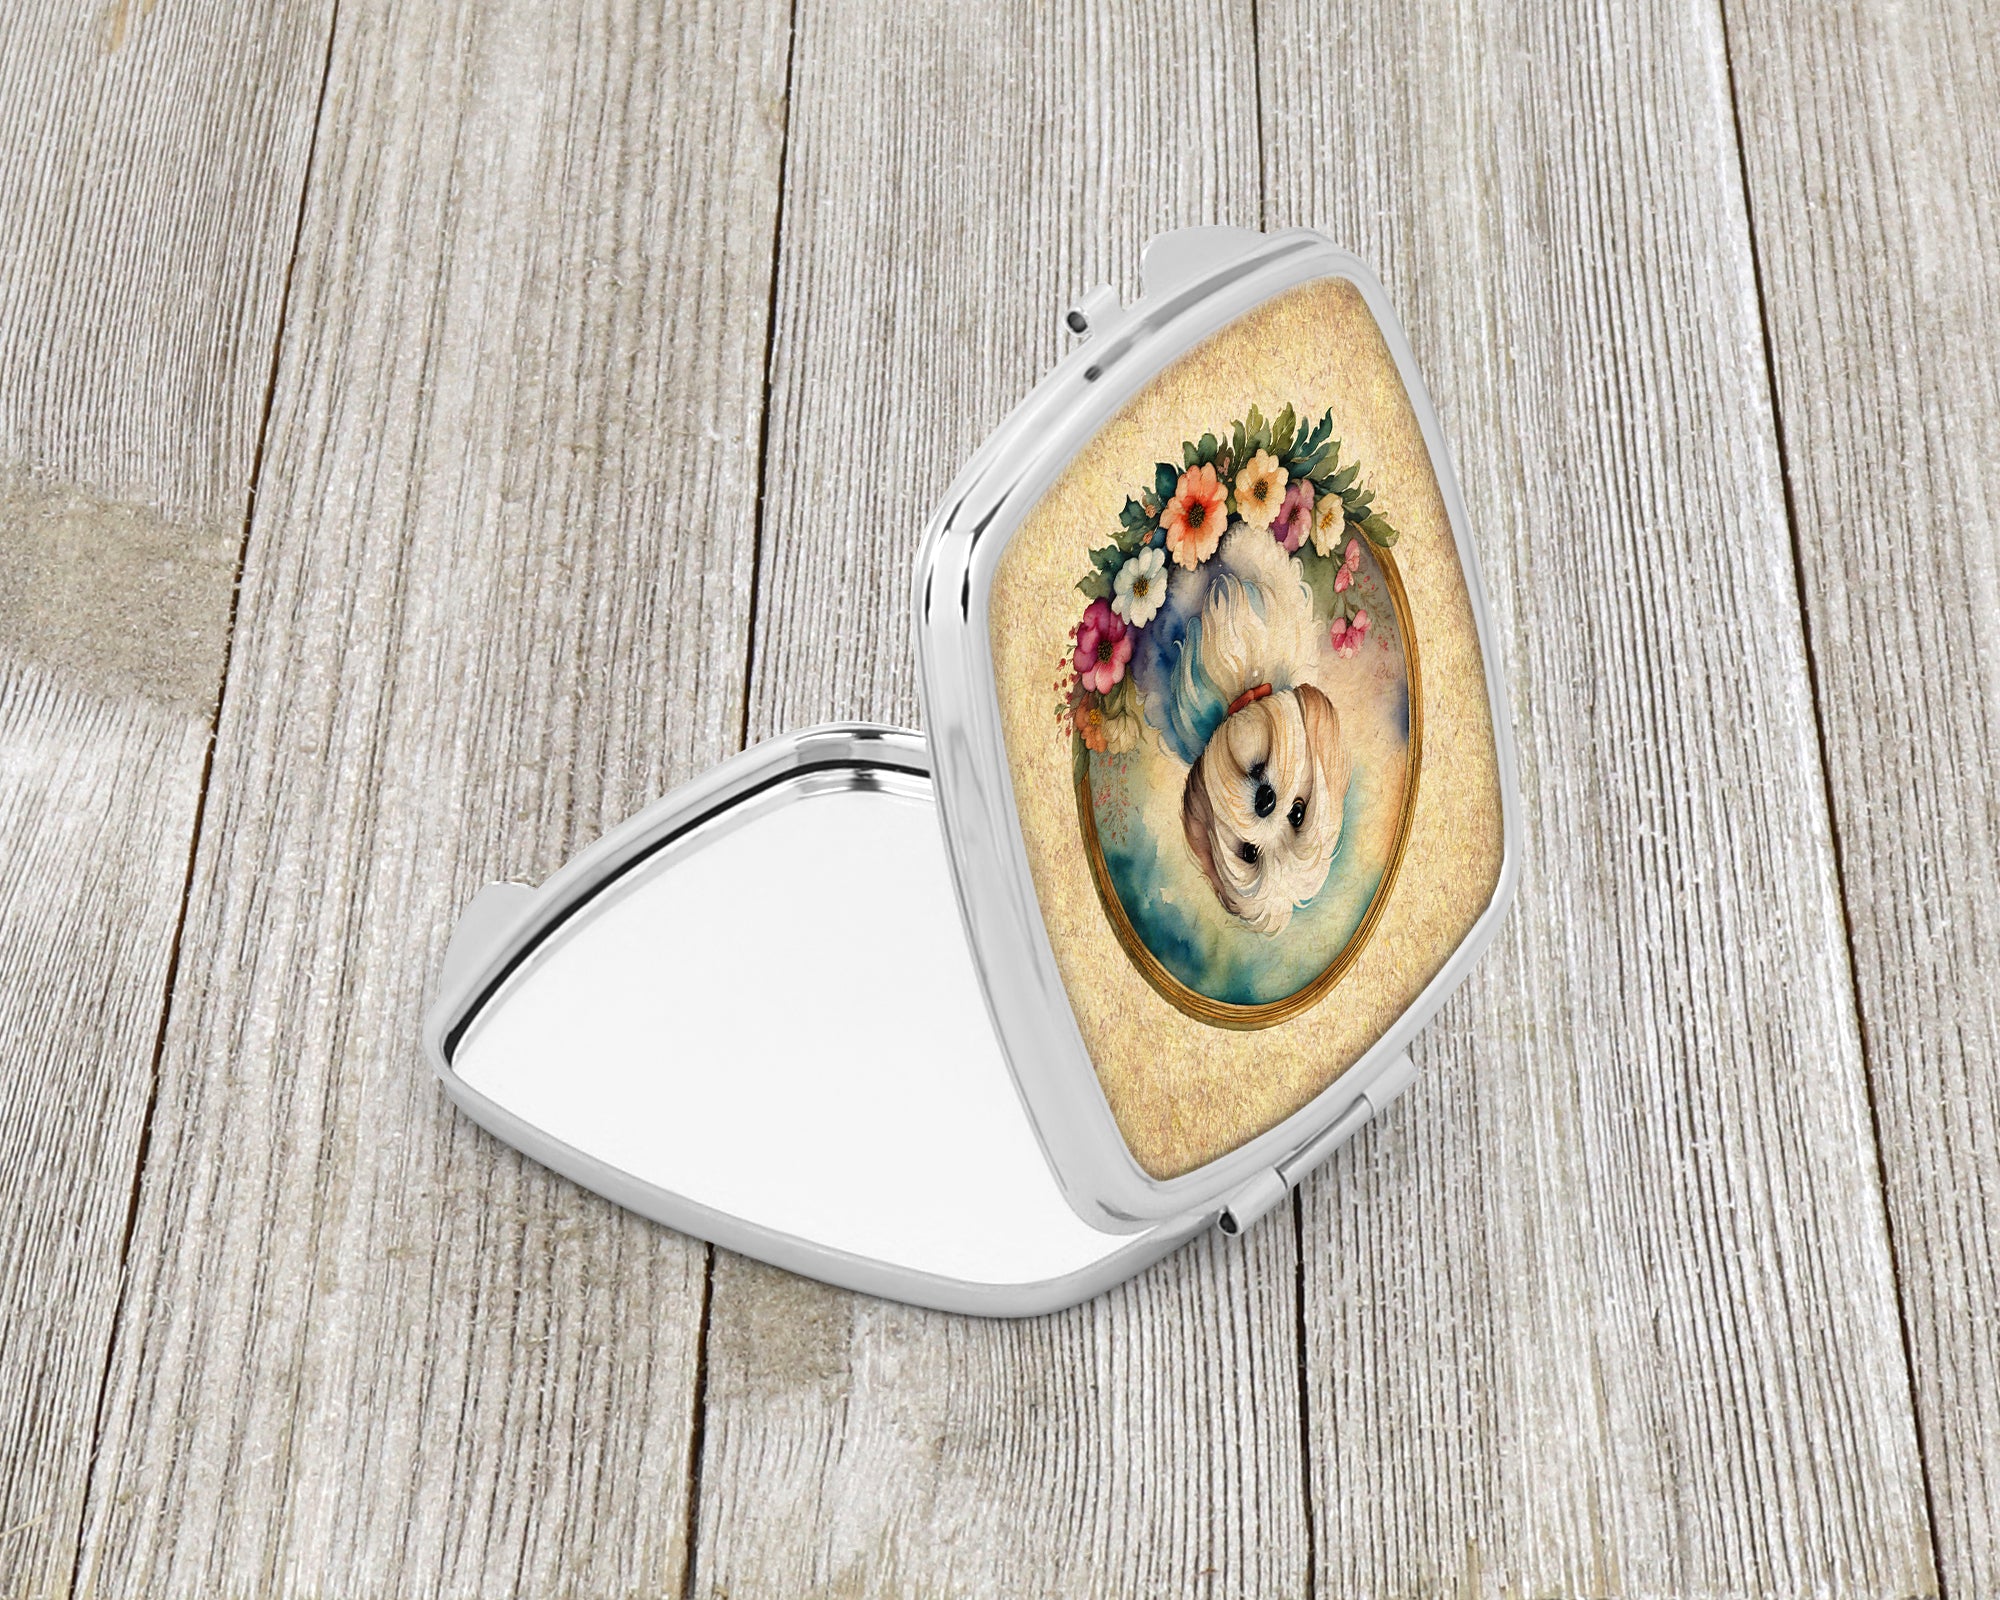 Buy this Coton De Tulear and Flowers Compact Mirror